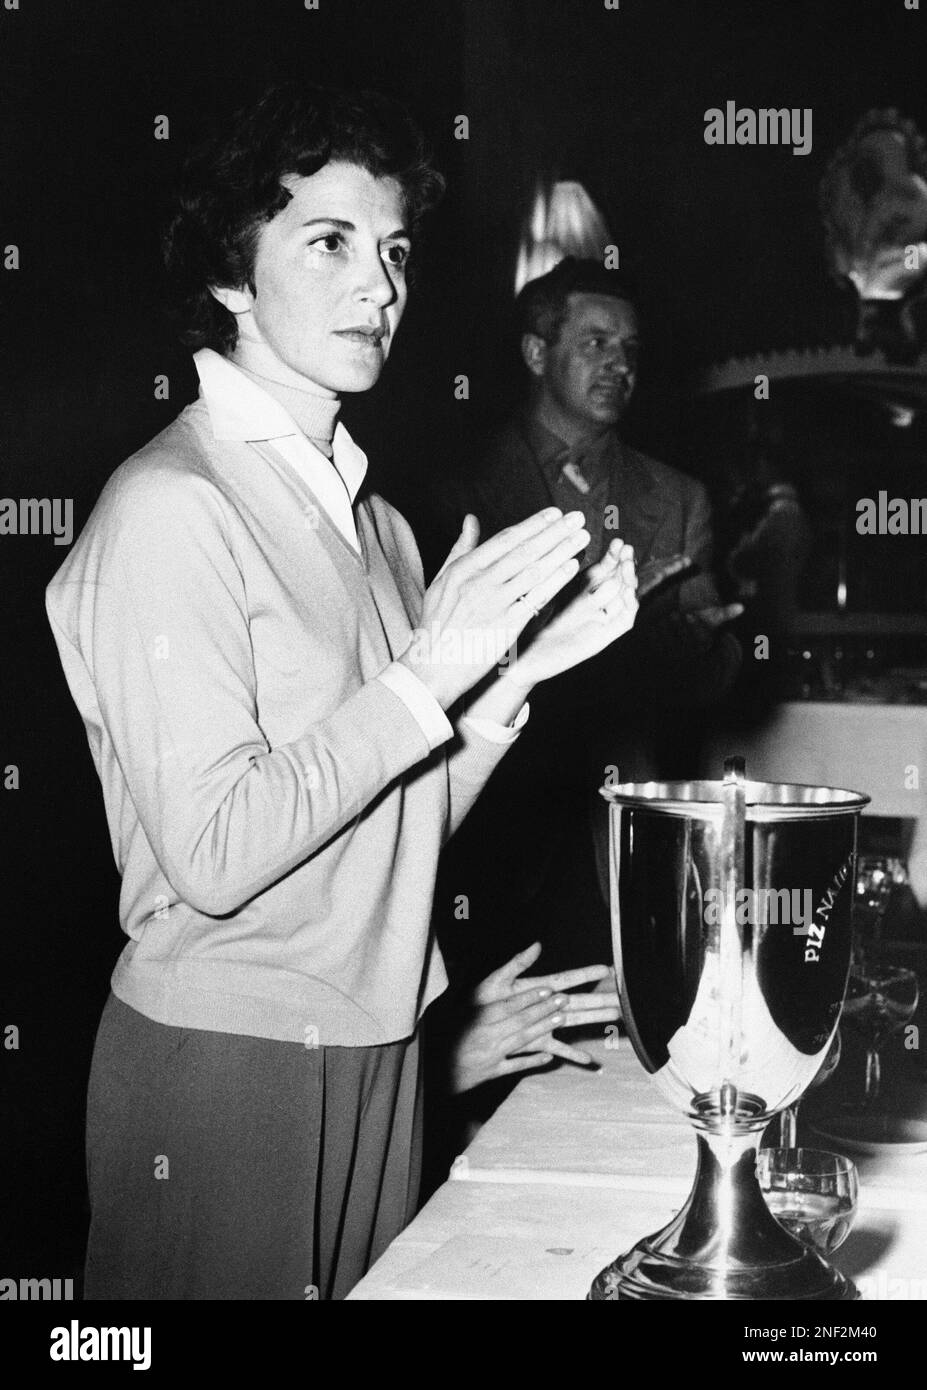 Madame Eugenia Niarchos, wife of the Greek shipping magnate Stavros  Niarchos stands behind the Piz Nair gold trophy at the Palace Hotel, St.  Mortiz, Switzerland on Feb. 24, 1957. She applauds winners